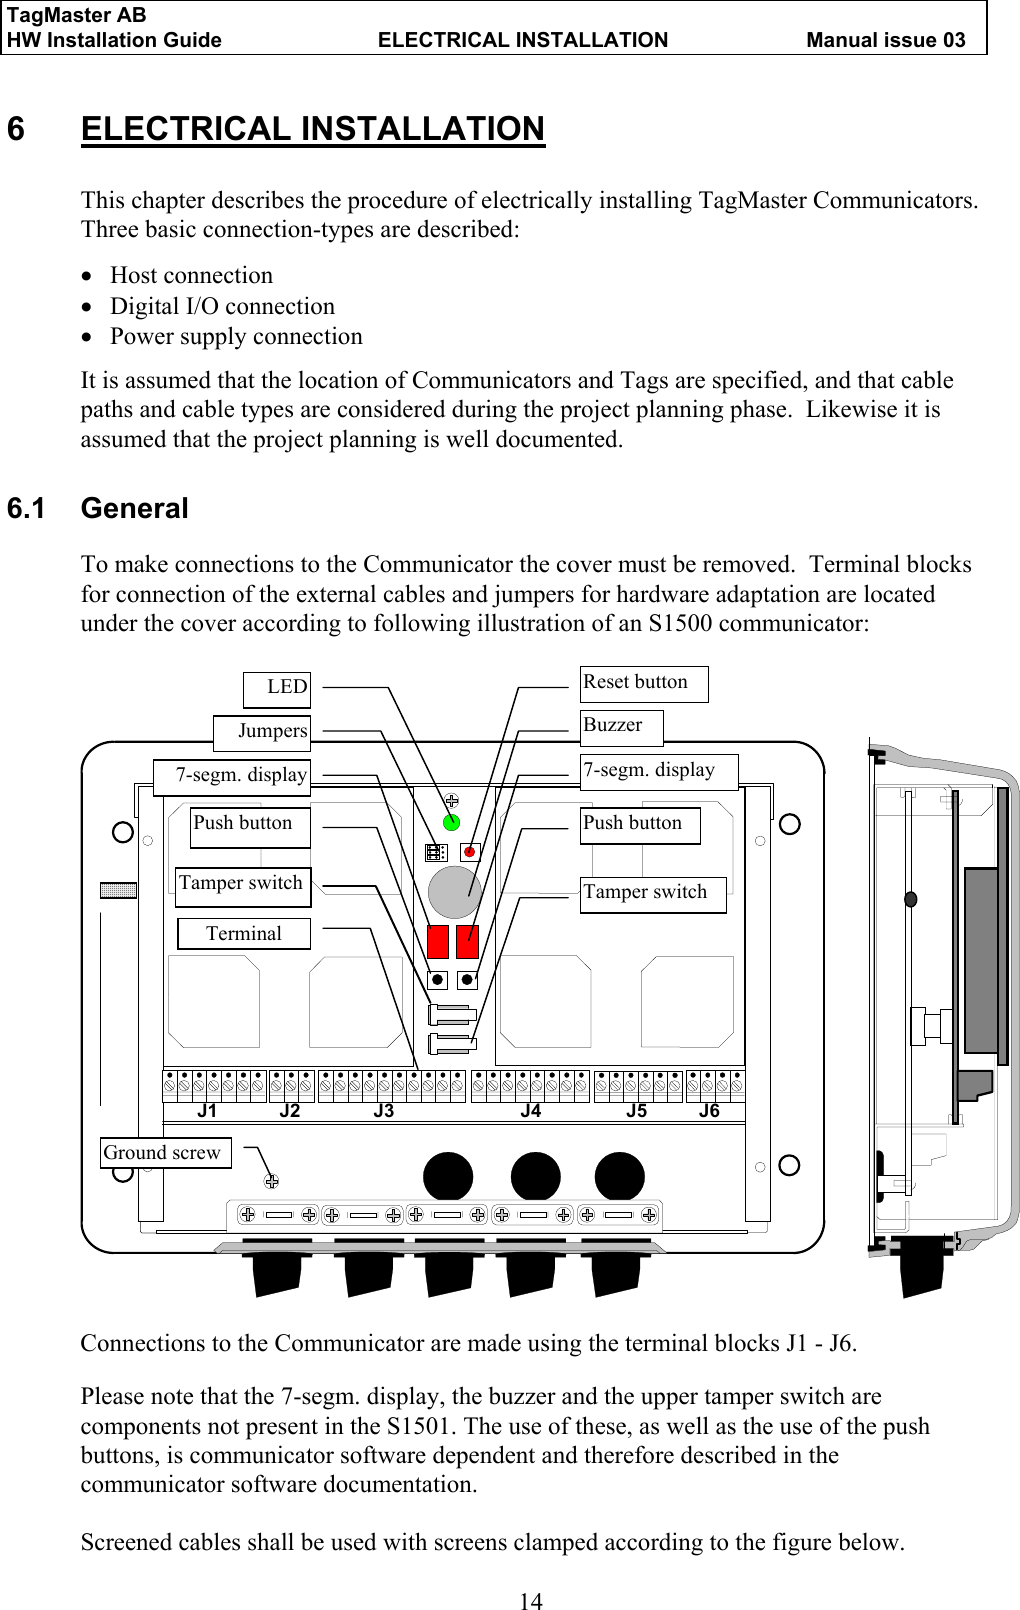 TagMaster AB     HW Installation Guide  ELECTRICAL INSTALLATION  Manual issue 03  14 6 ELECTRICAL INSTALLATION This chapter describes the procedure of electrically installing TagMaster Communicators. Three basic connection-types are described:  • Host connection • Digital I/O connection • Power supply connection  It is assumed that the location of Communicators and Tags are specified, and that cable paths and cable types are considered during the project planning phase.  Likewise it is assumed that the project planning is well documented. 6.1 General To make connections to the Communicator the cover must be removed.  Terminal blocks for connection of the external cables and jumpers for hardware adaptation are located under the cover according to following illustration of an S1500 communicator:  J1 J2 J3 J4 J5 J6Reset button7-segm. displayBuzzerPush buttonJumpersLEDTerminal7-segm. displayPush buttonTamper switchGround screwTamper switch  Connections to the Communicator are made using the terminal blocks J1 - J6.  Please note that the 7-segm. display, the buzzer and the upper tamper switch are components not present in the S1501. The use of these, as well as the use of the push buttons, is communicator software dependent and therefore described in the communicator software documentation.  Screened cables shall be used with screens clamped according to the figure below. 